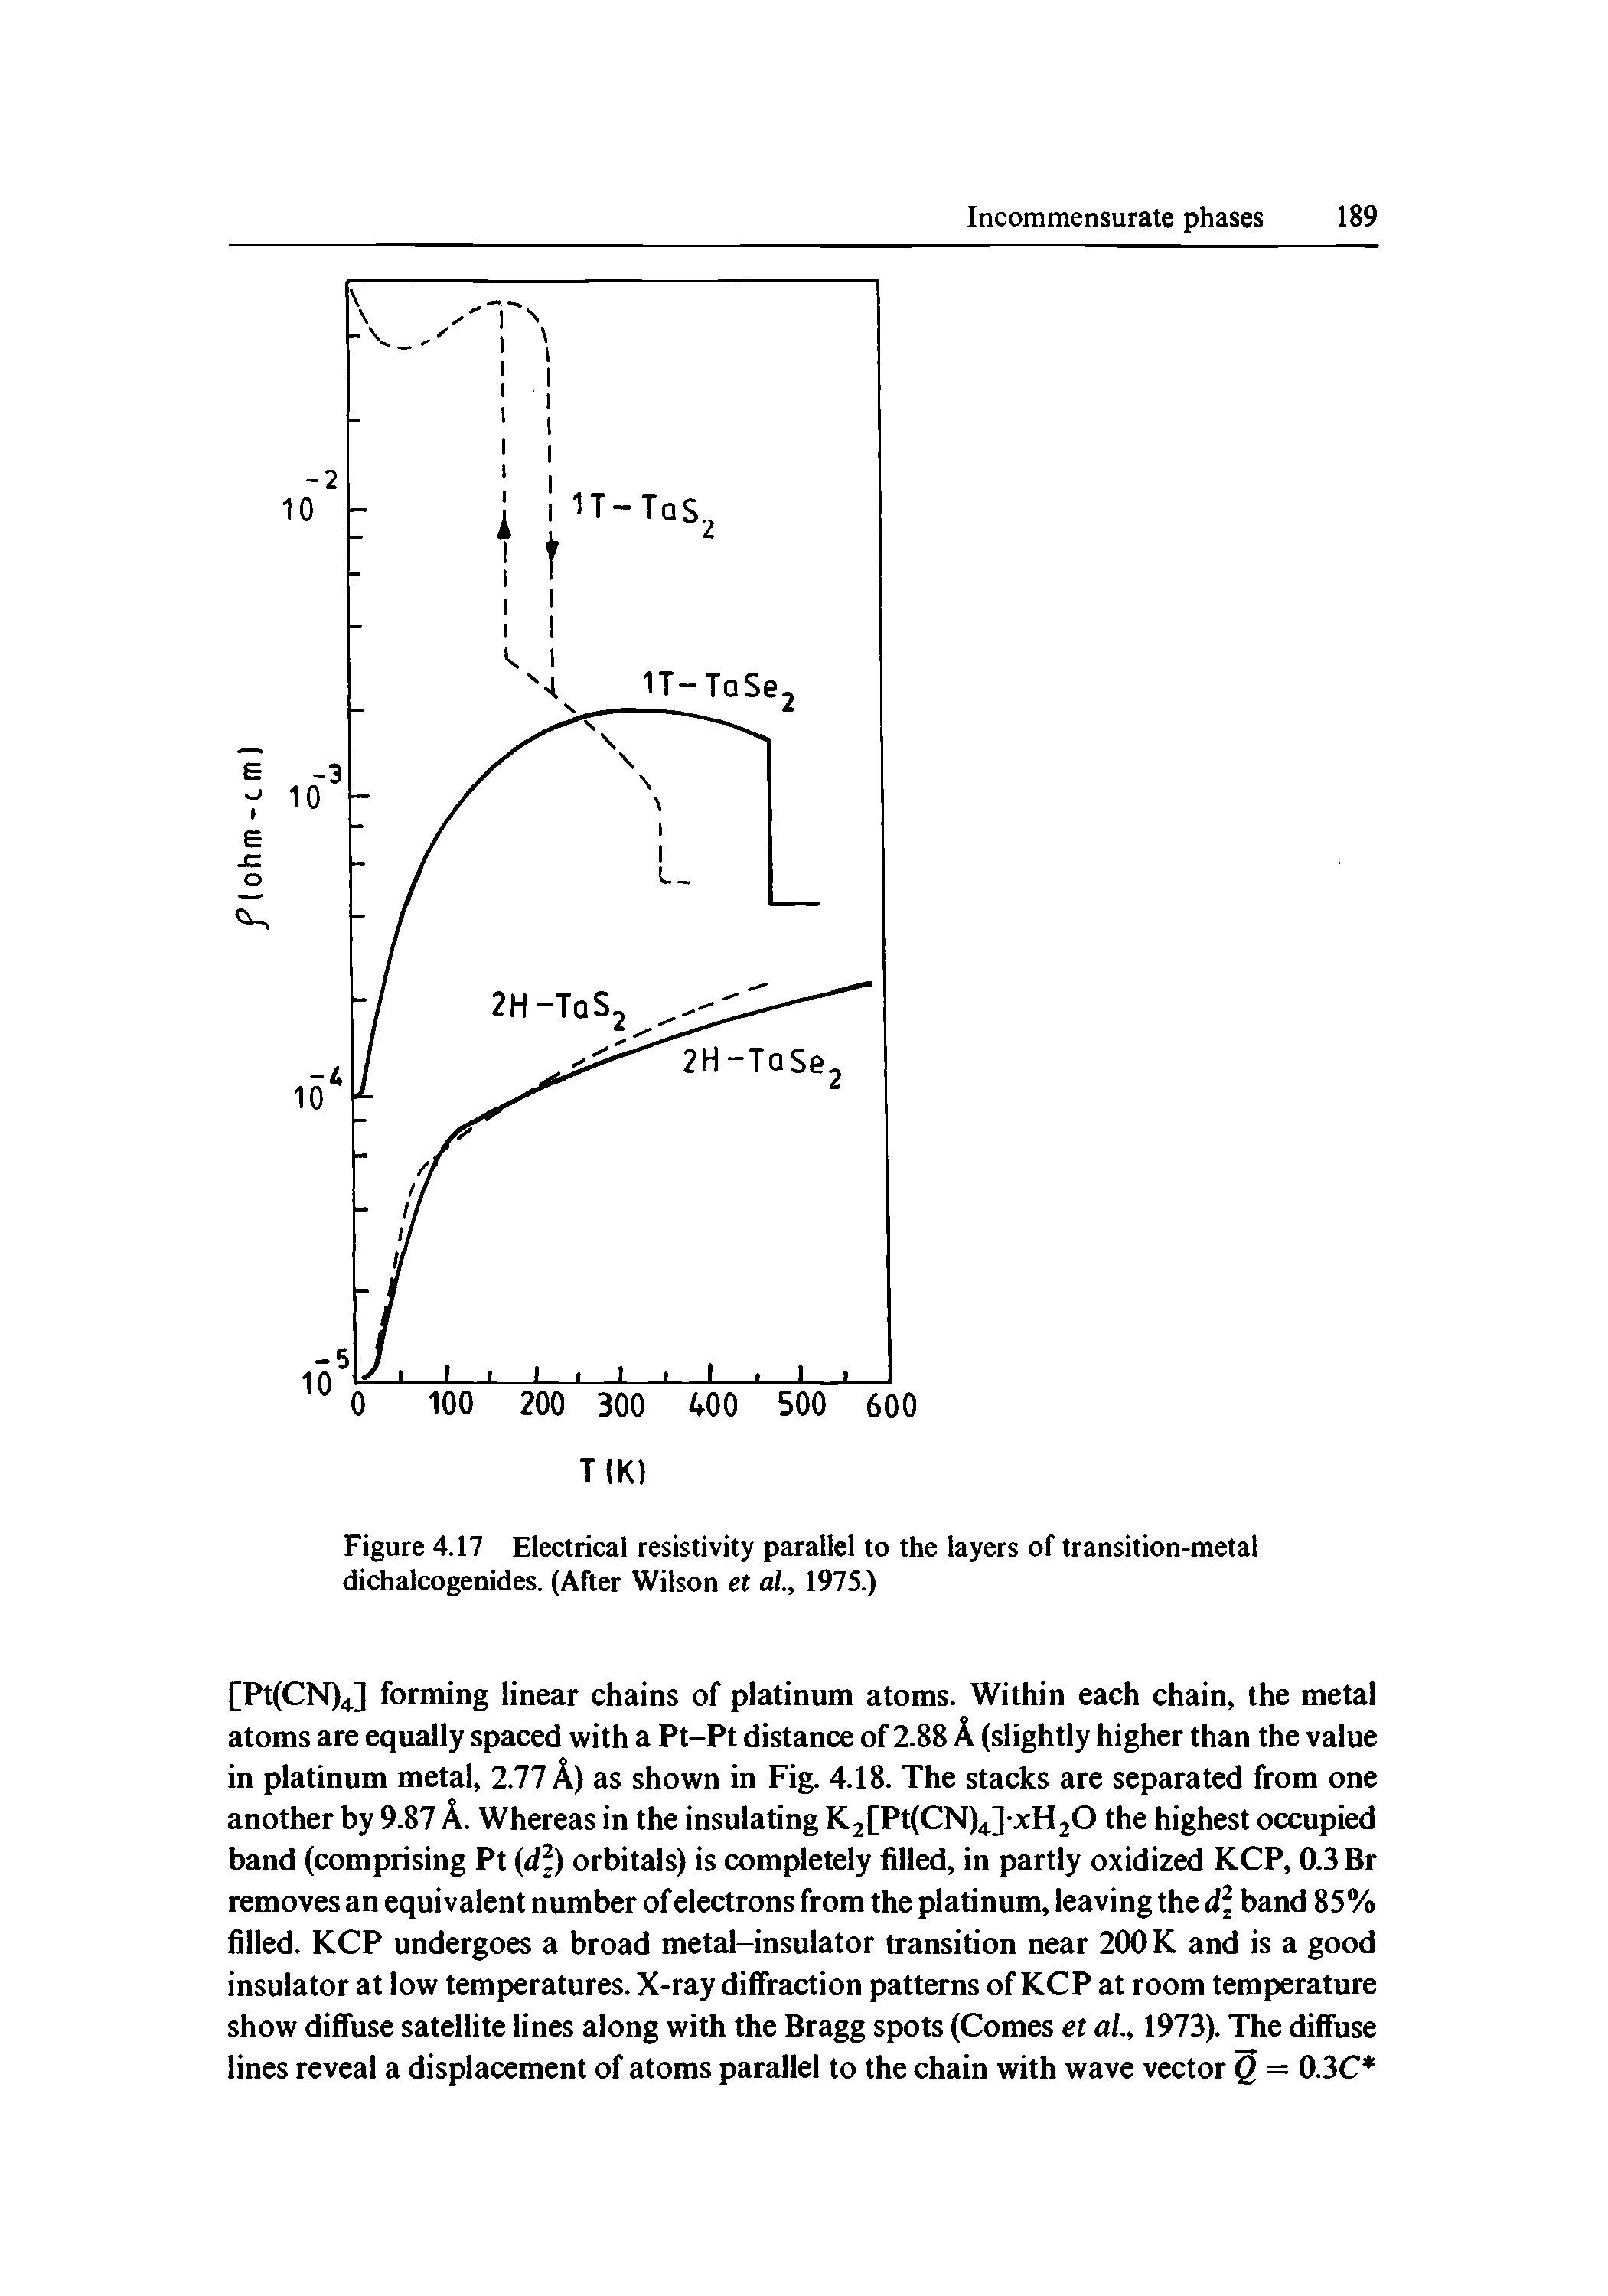 Figure 4.17 Electrical resistivity parallel to the layers of transition-metal dichalcogenides. (After Wilson et al, 1975.)...